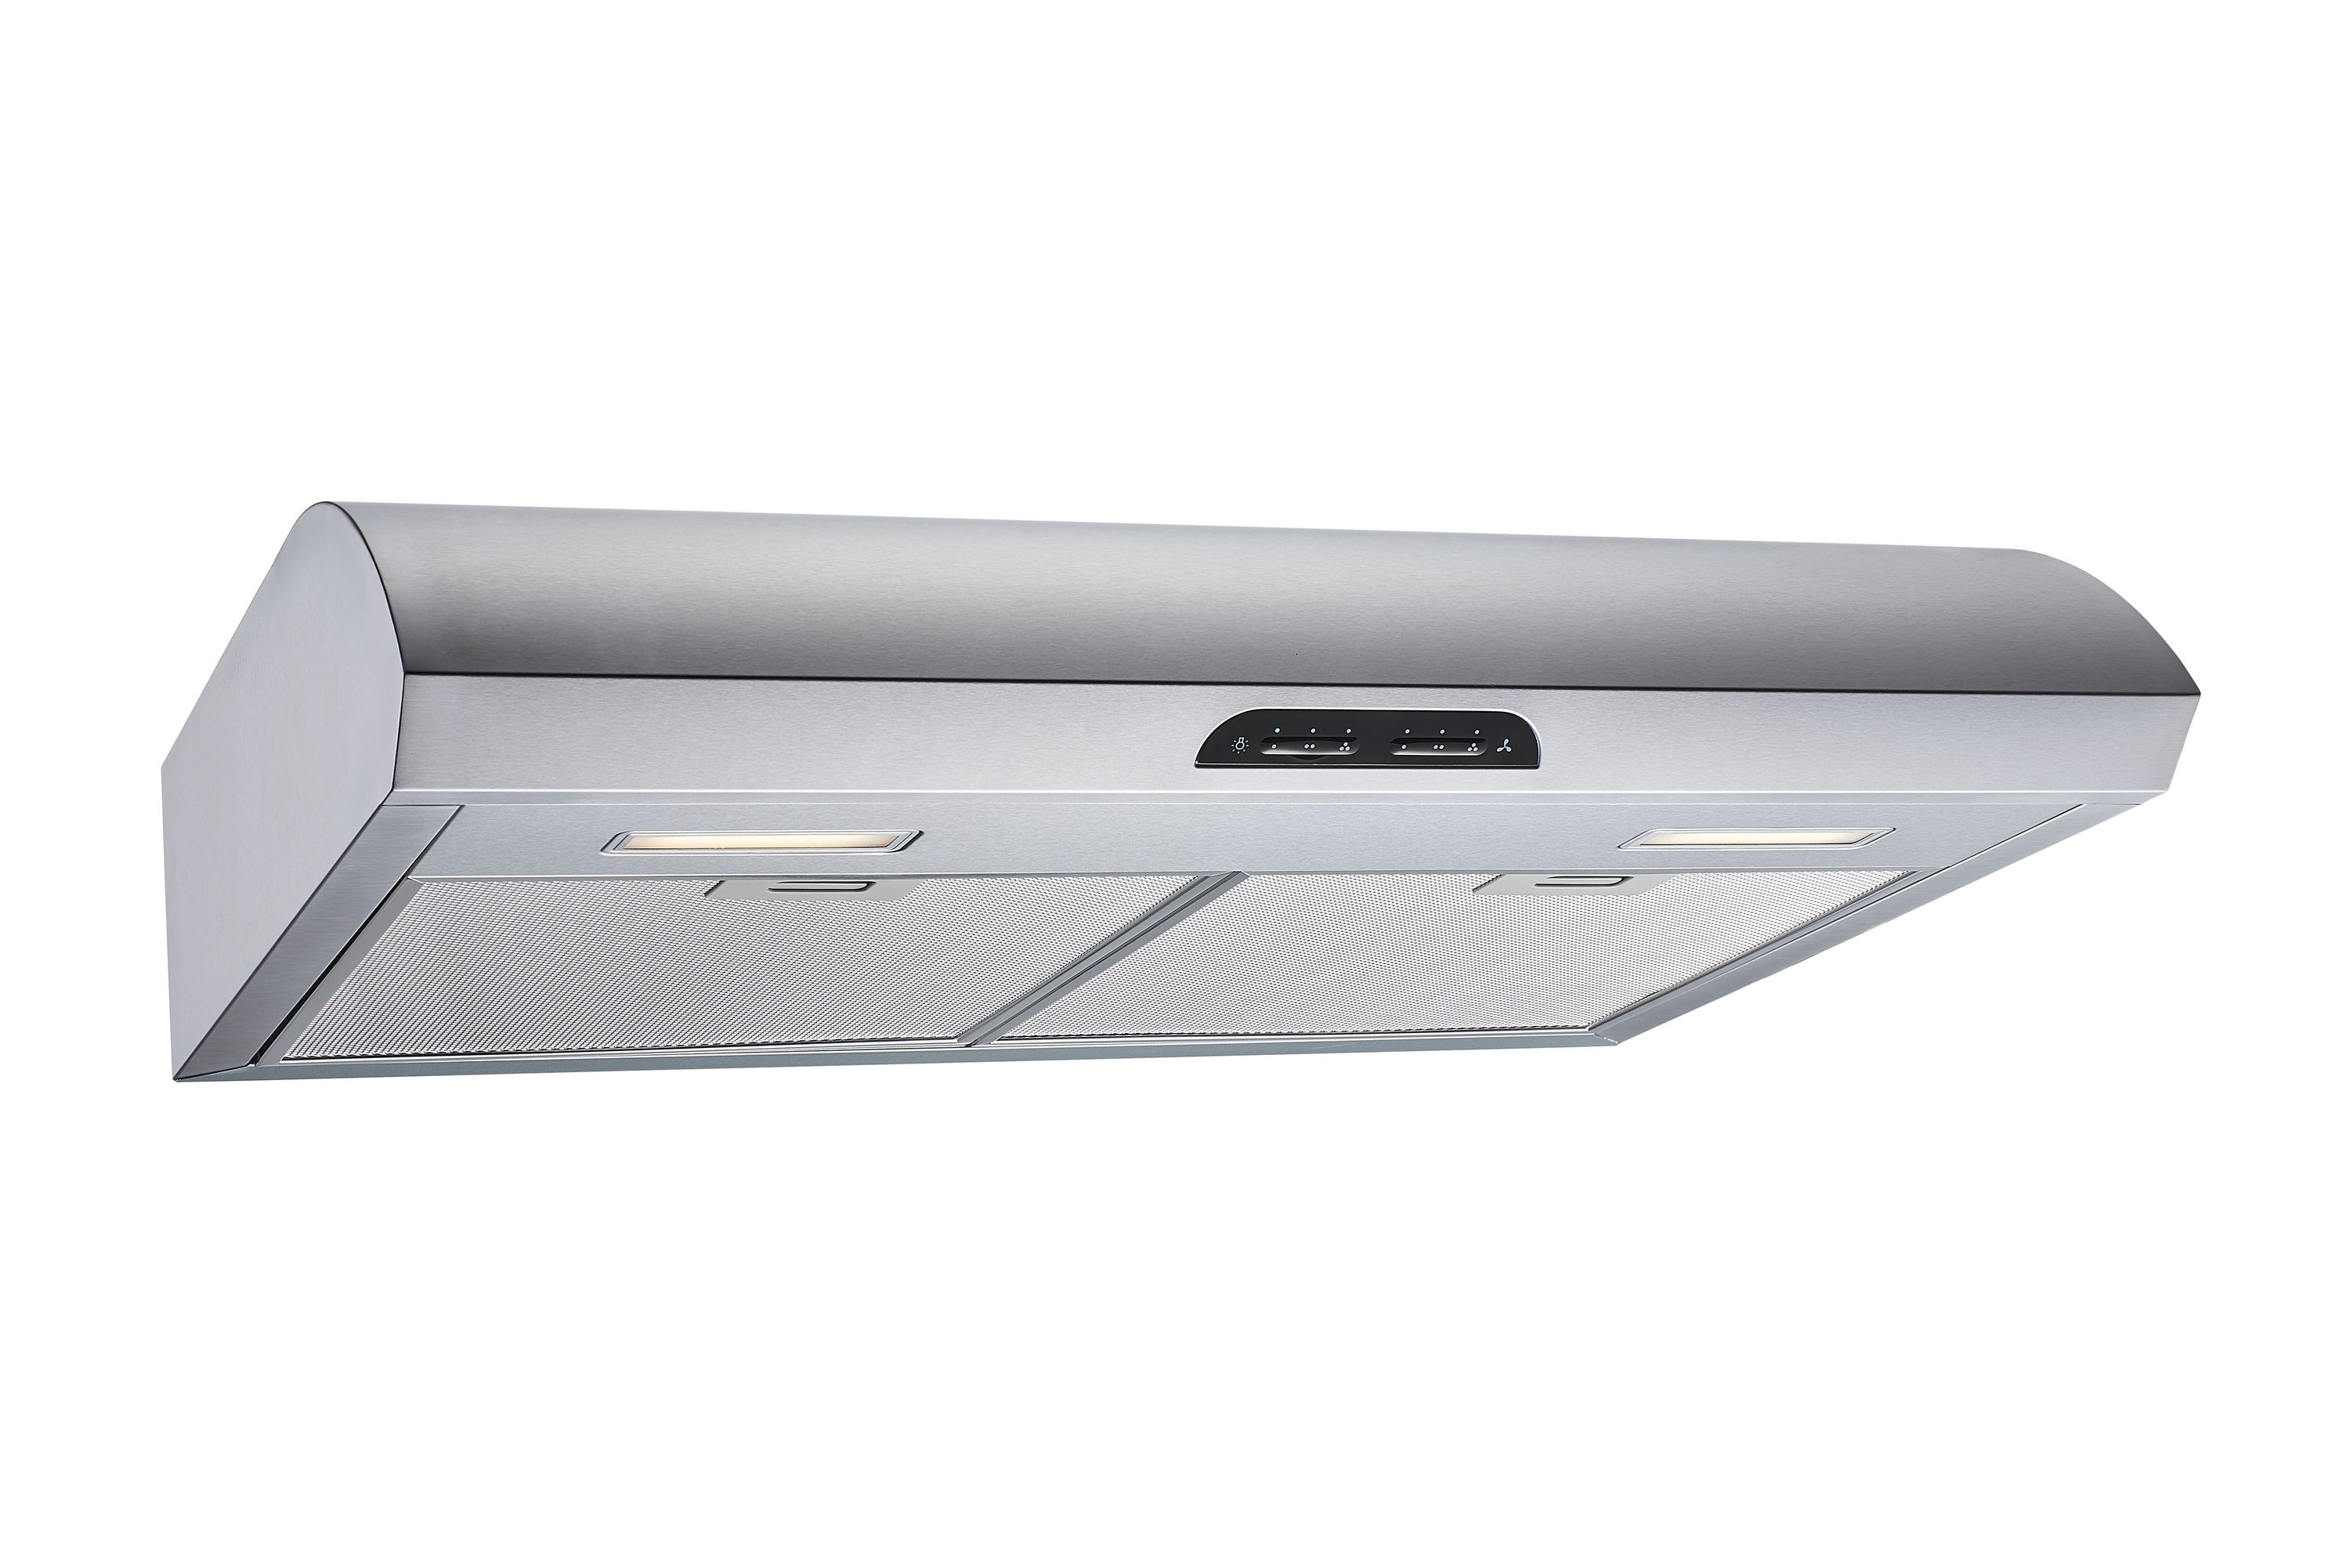 Winflo 30 466 CFM Ducted Under Cabinet Range Hood in Stainless Steel &  Reviews